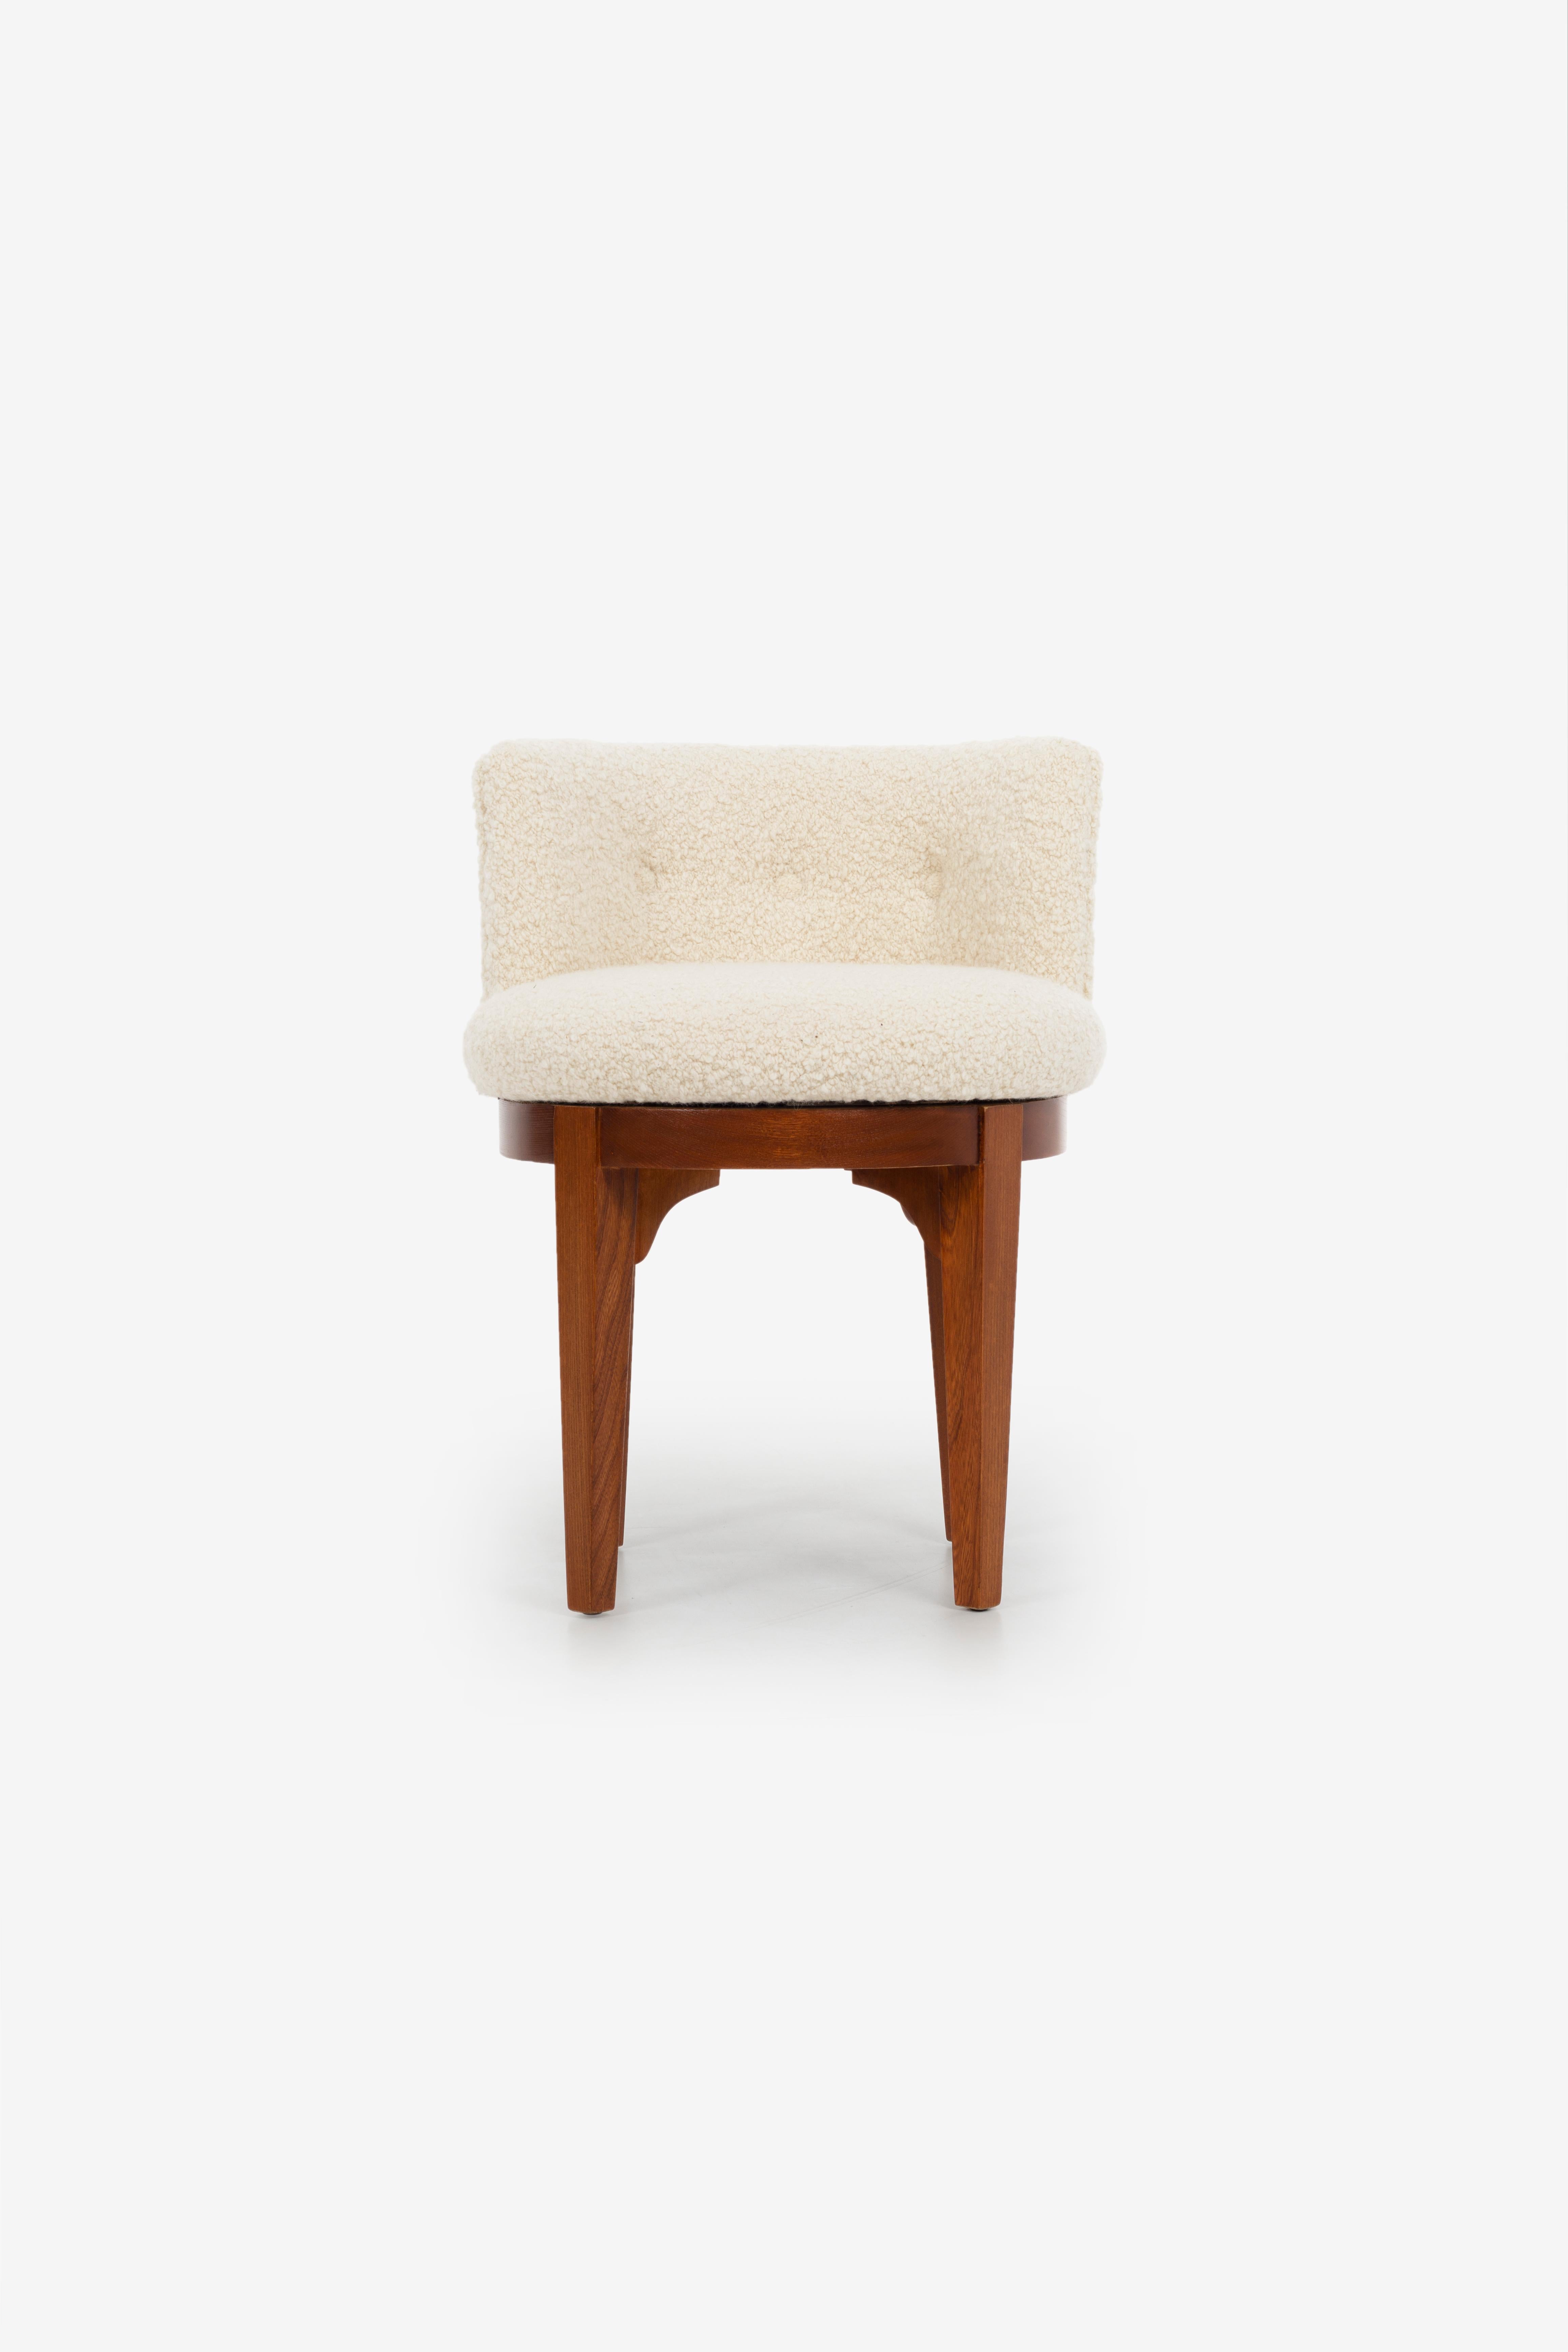 Edward Wormley swivel vanity stool for Drexel, reupholstered with great plains boucle, walnut base.